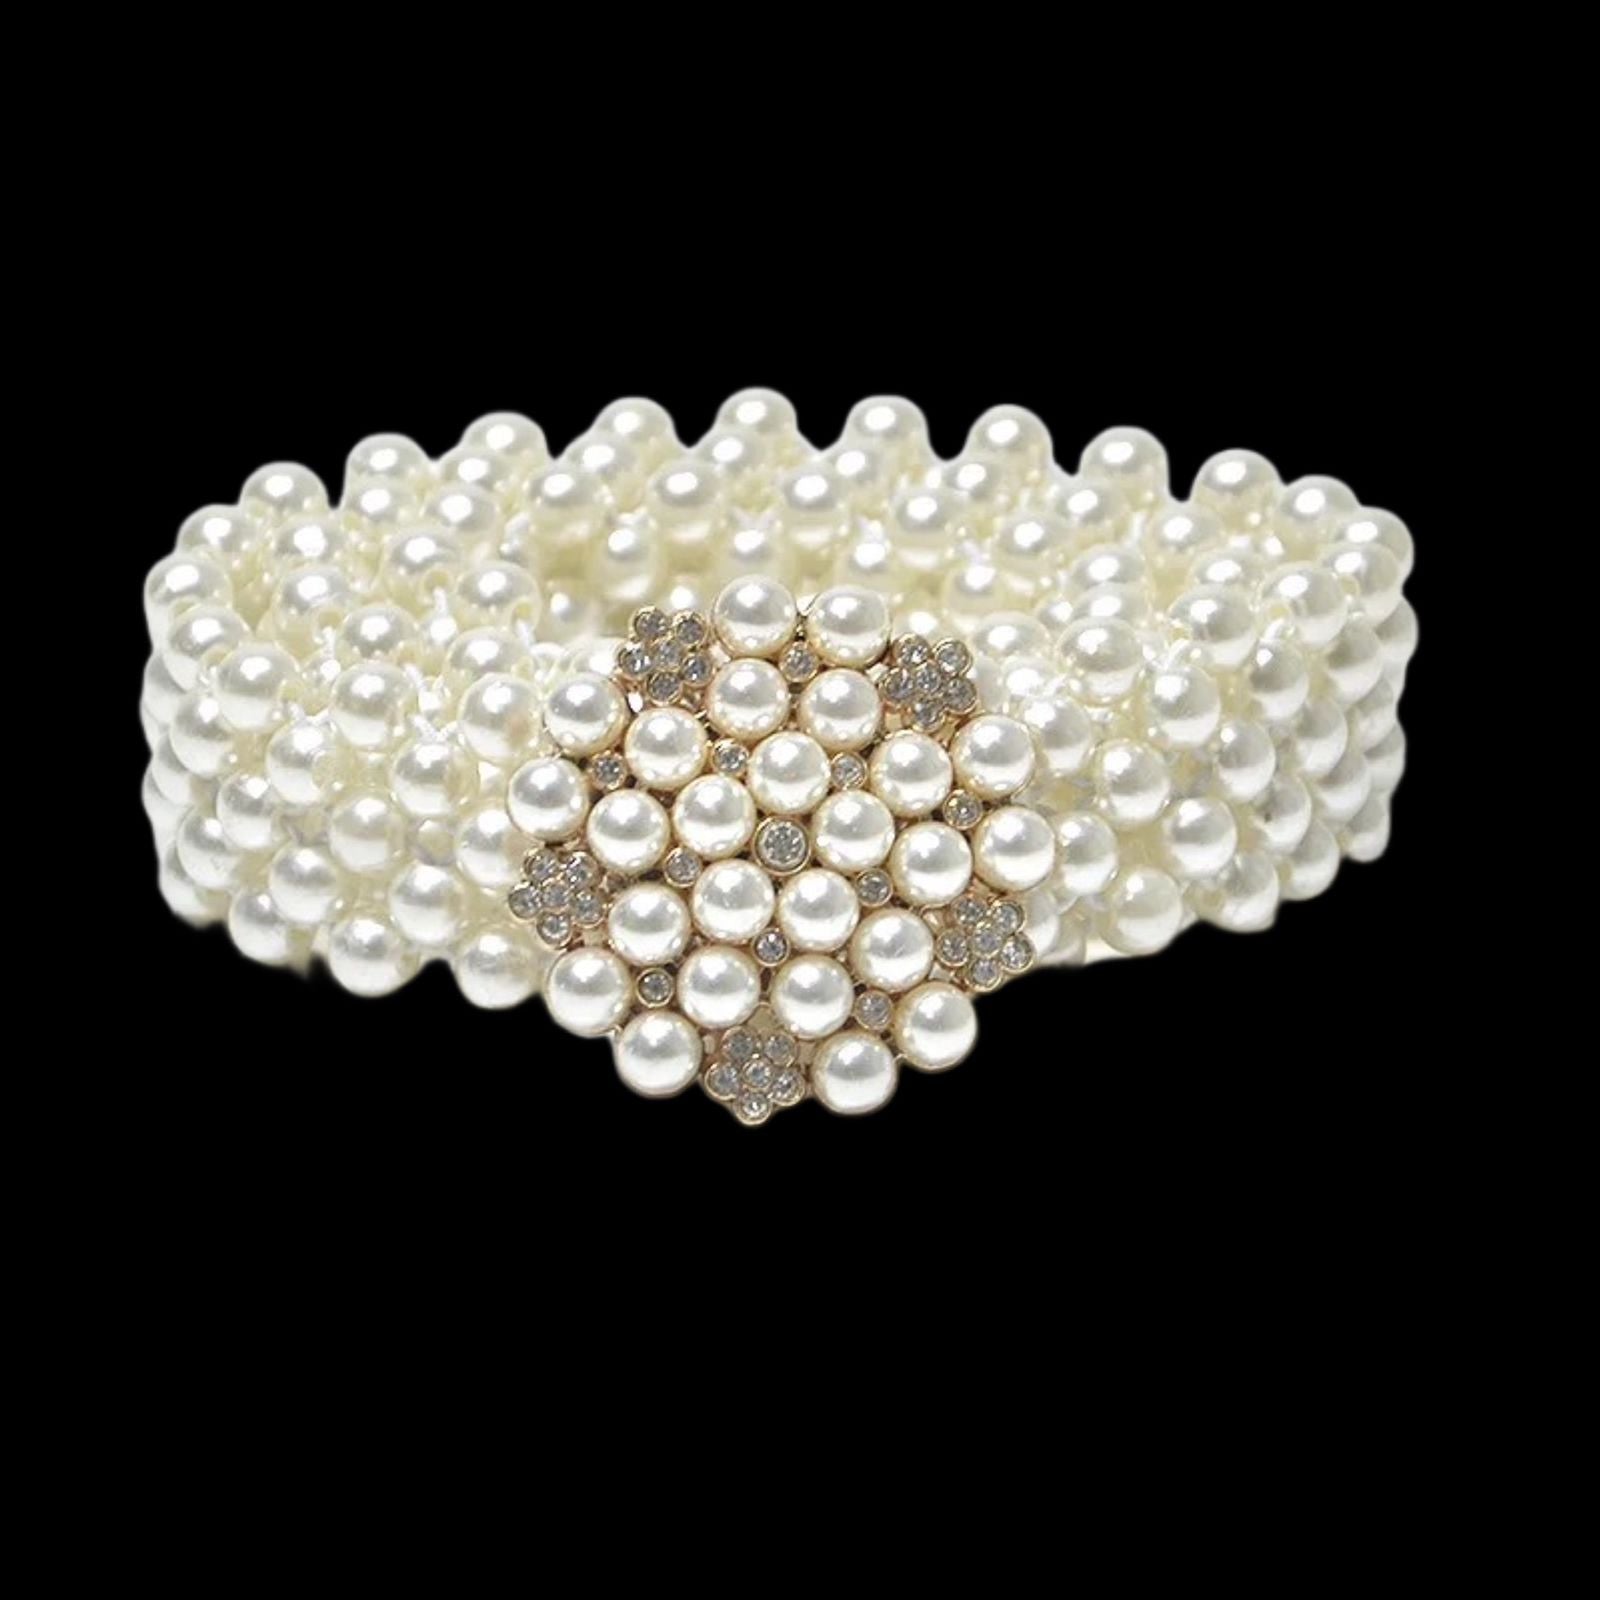 Flower and Pearls Belt